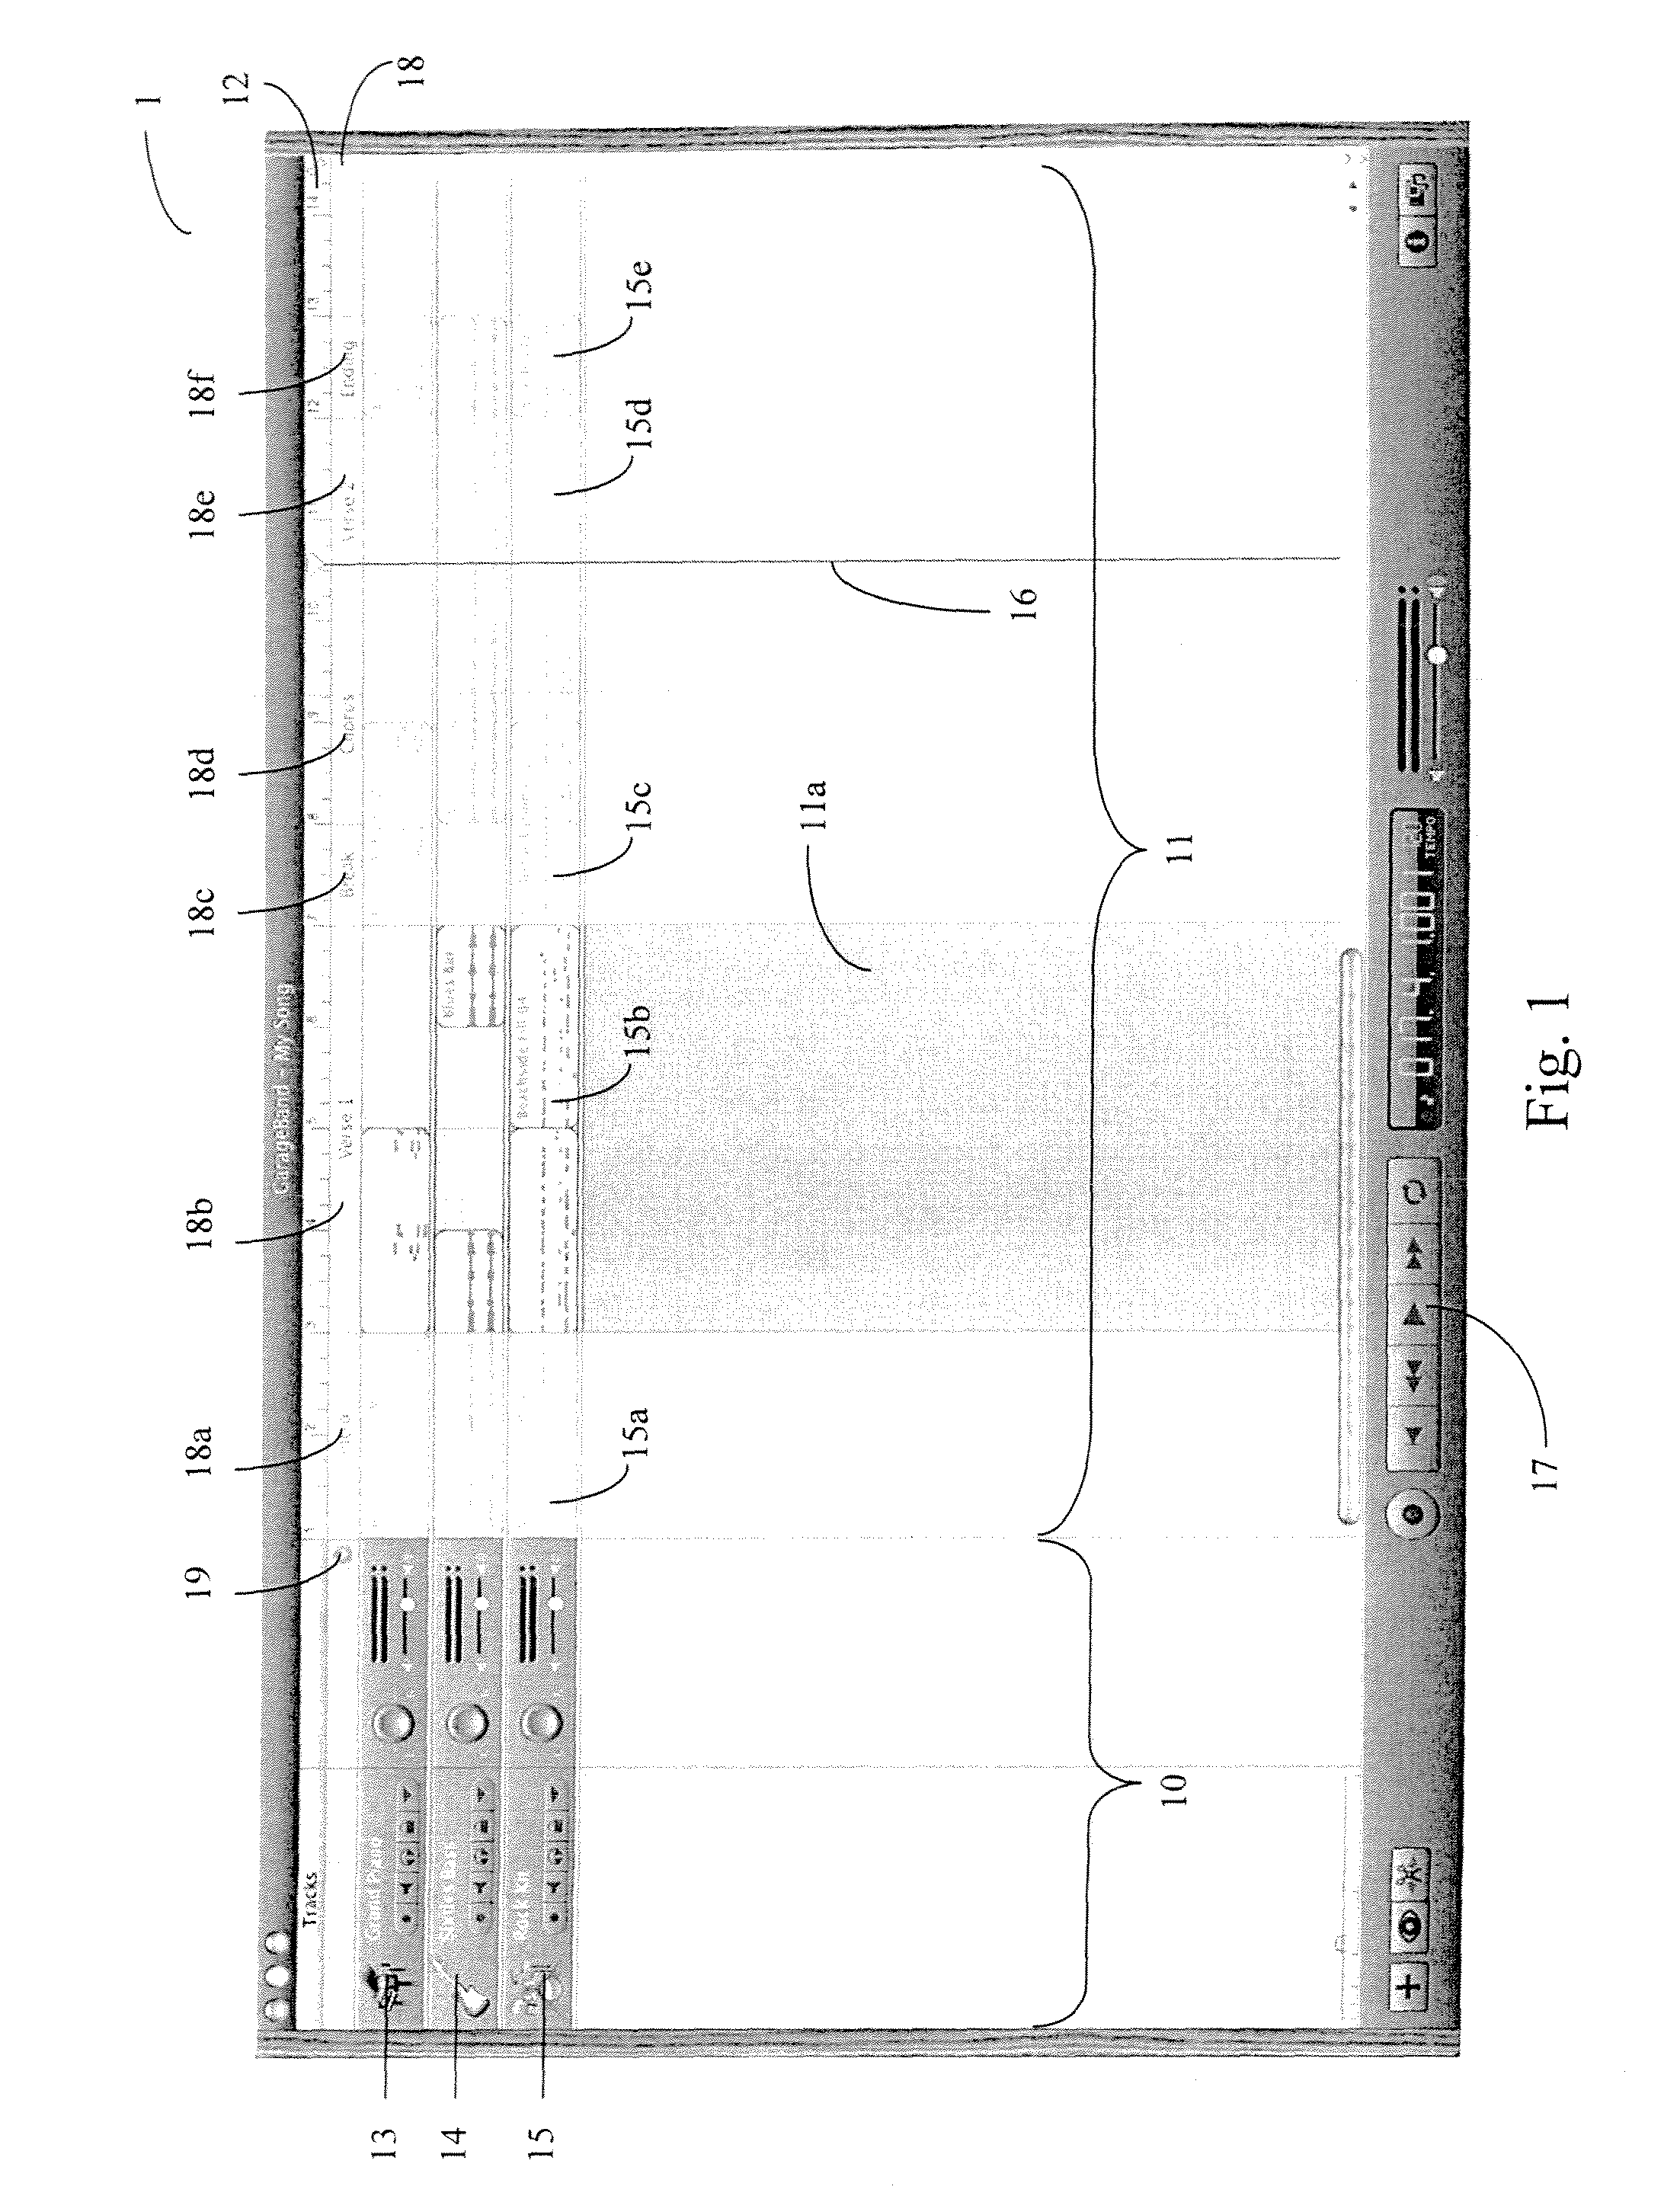 Method and system to process digital audio data